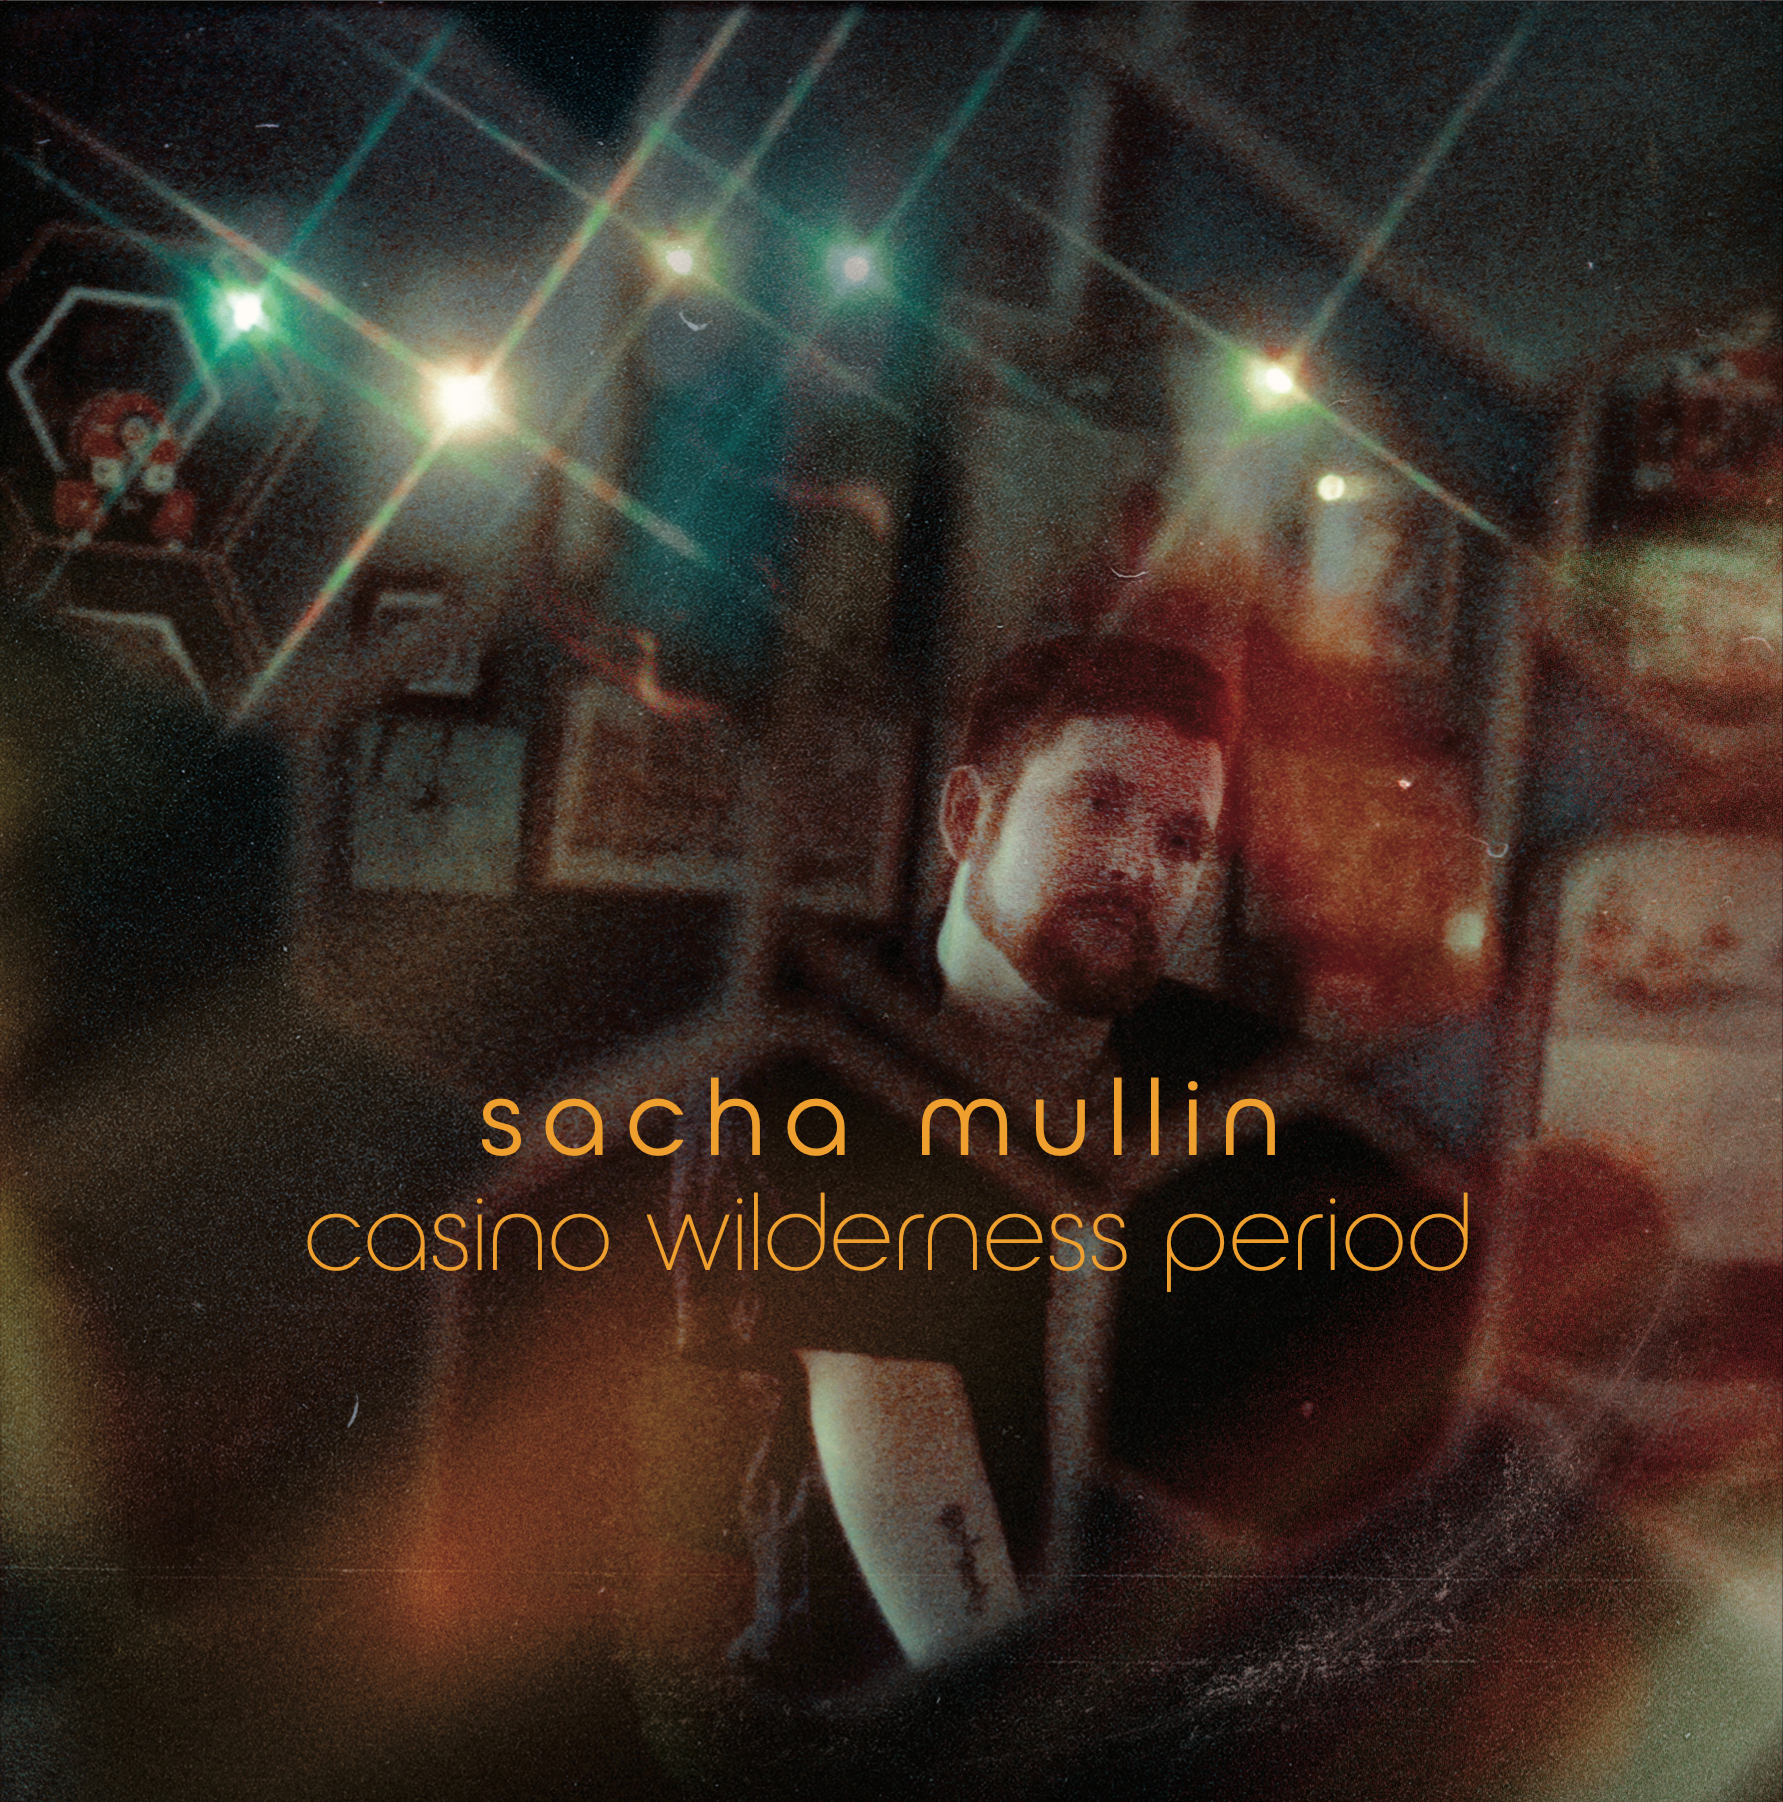 A decade on from his debut album, Sacha Mullin delivers a soulful new collection